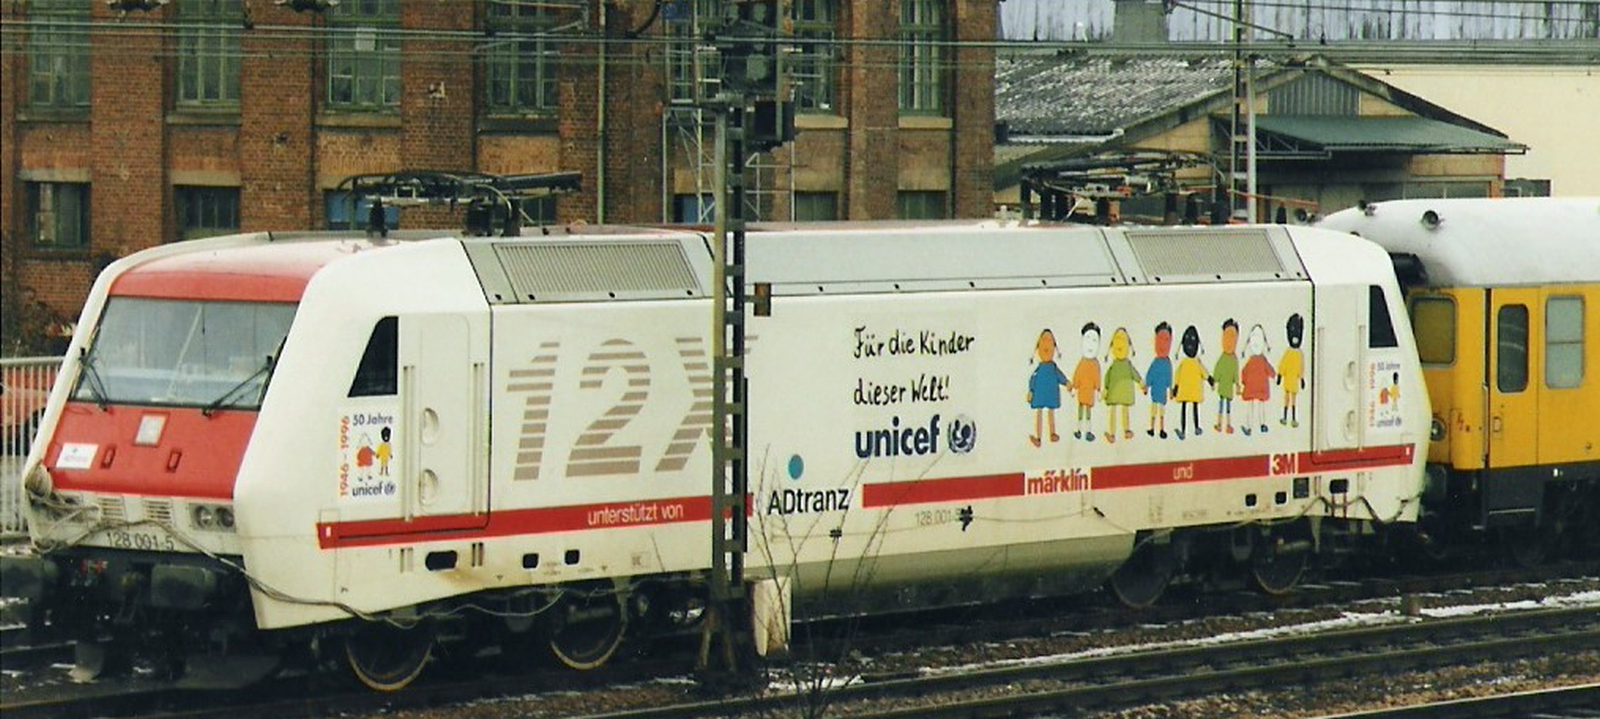 128 001 with UNICEF advertising in February 1996 in Trier